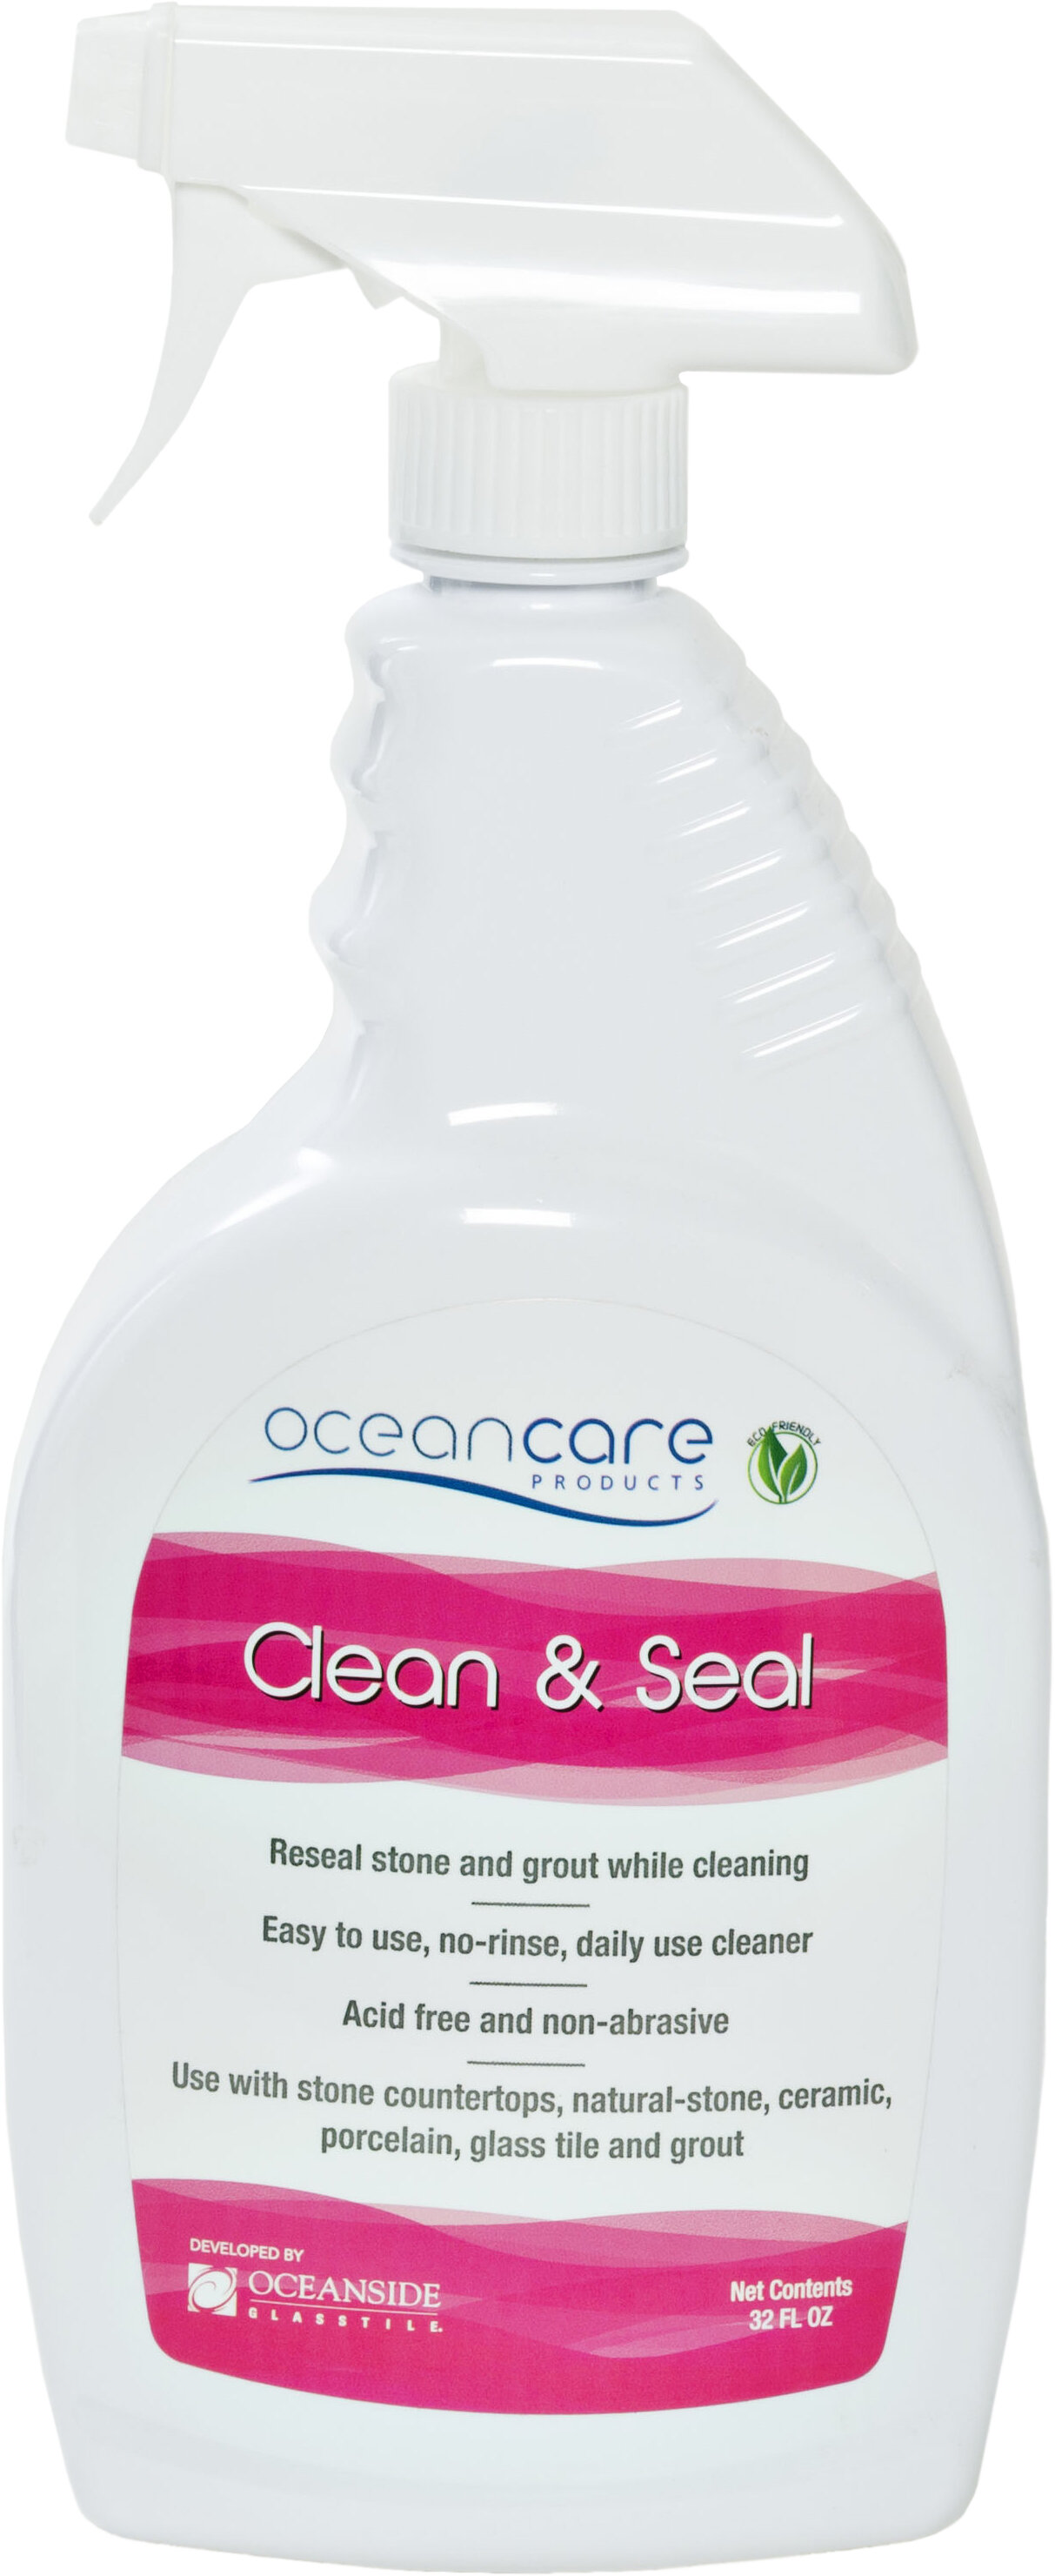 Oceancare Products Clean & Seal Quart Trigger & Reviews